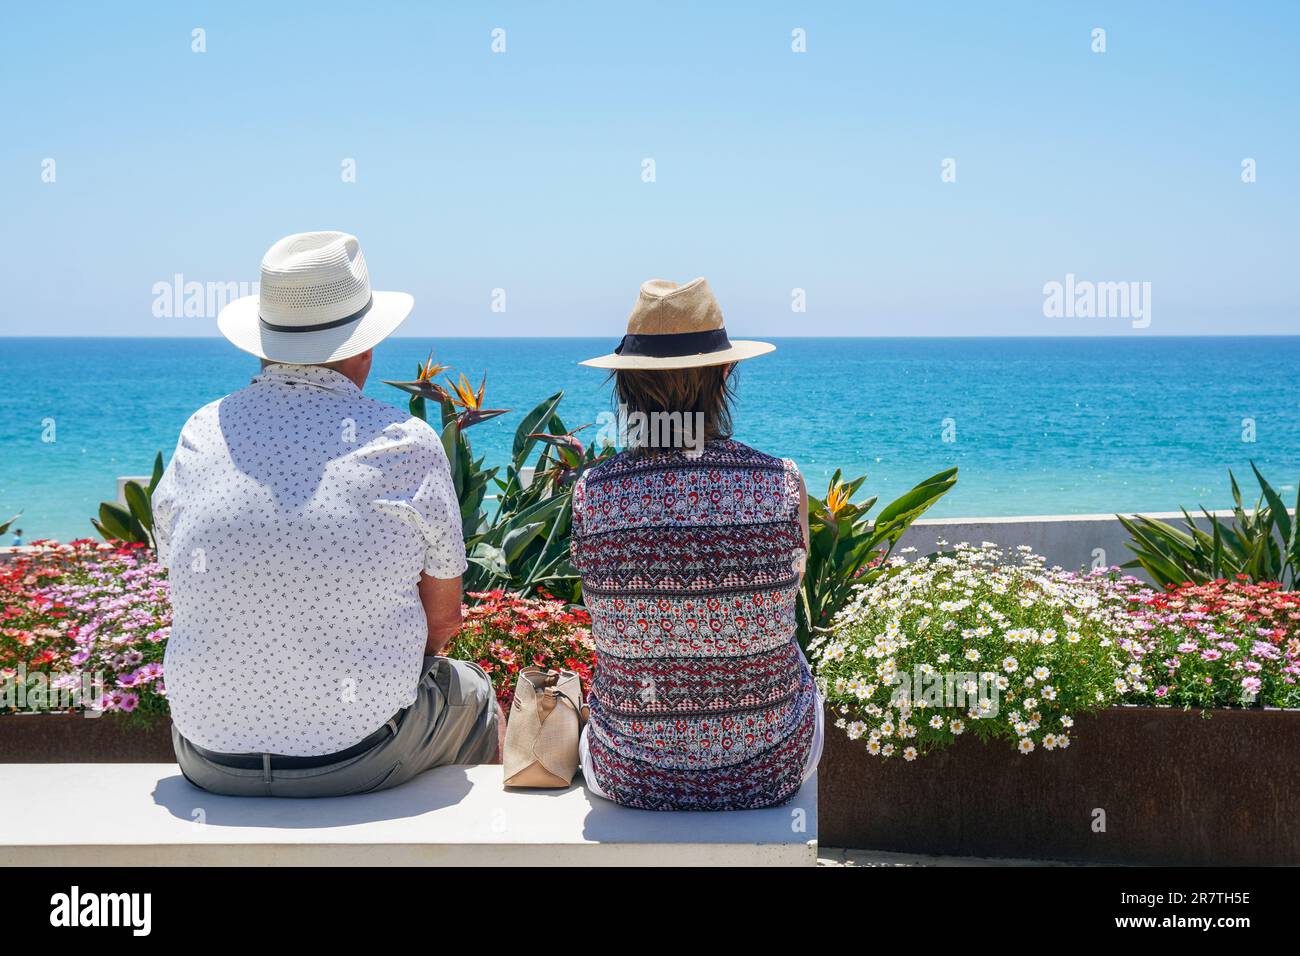 Man and woman sitting on a public bench and looking over the small garden and beach to the sea and horizon, Quinta do Lobo, Algarve, Portugal Stock Photo